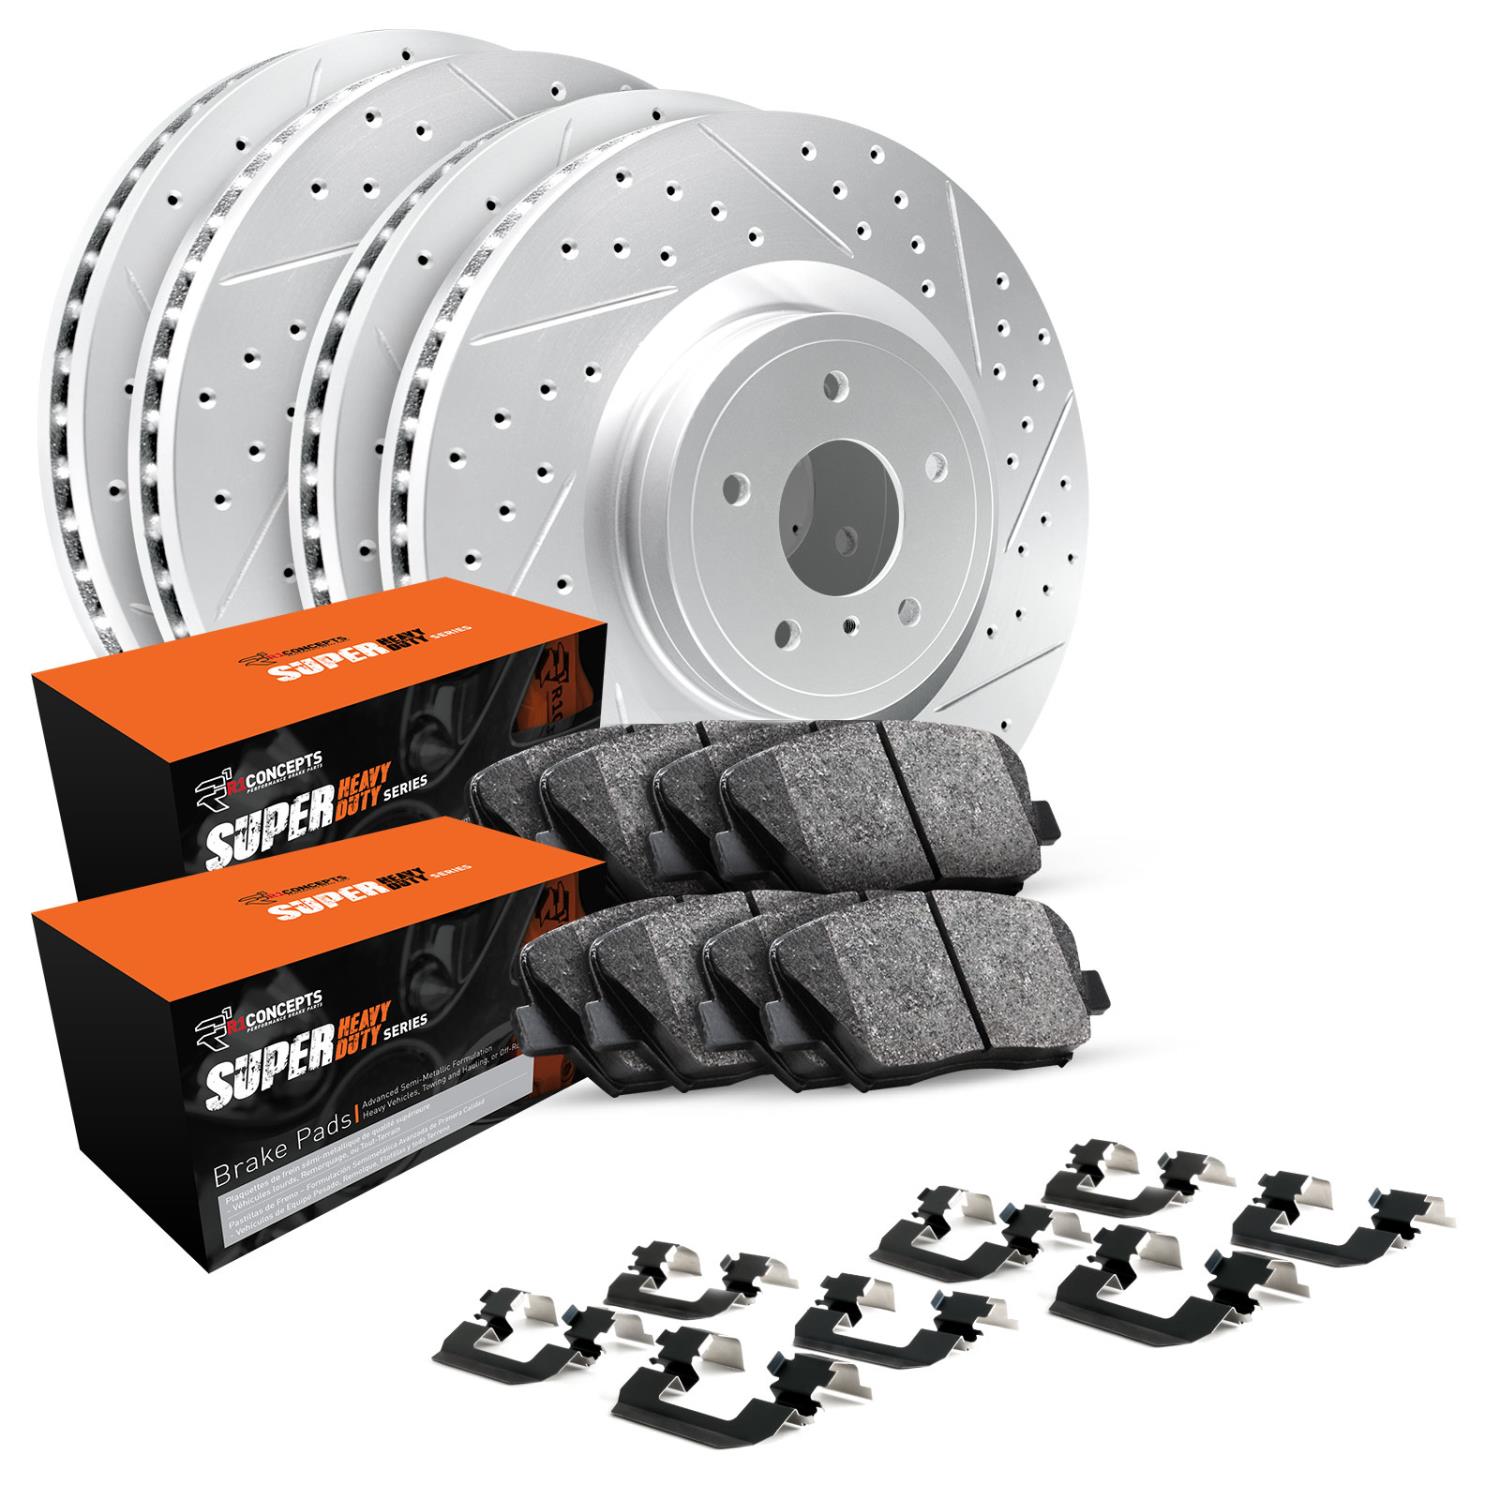 GEO-Carbon Drilled & Slotted Brake Rotor & Drum Set w/Super-Duty Pads, Shoes, & Hardware, 2005-2010 Fits Multiple Makes/Models